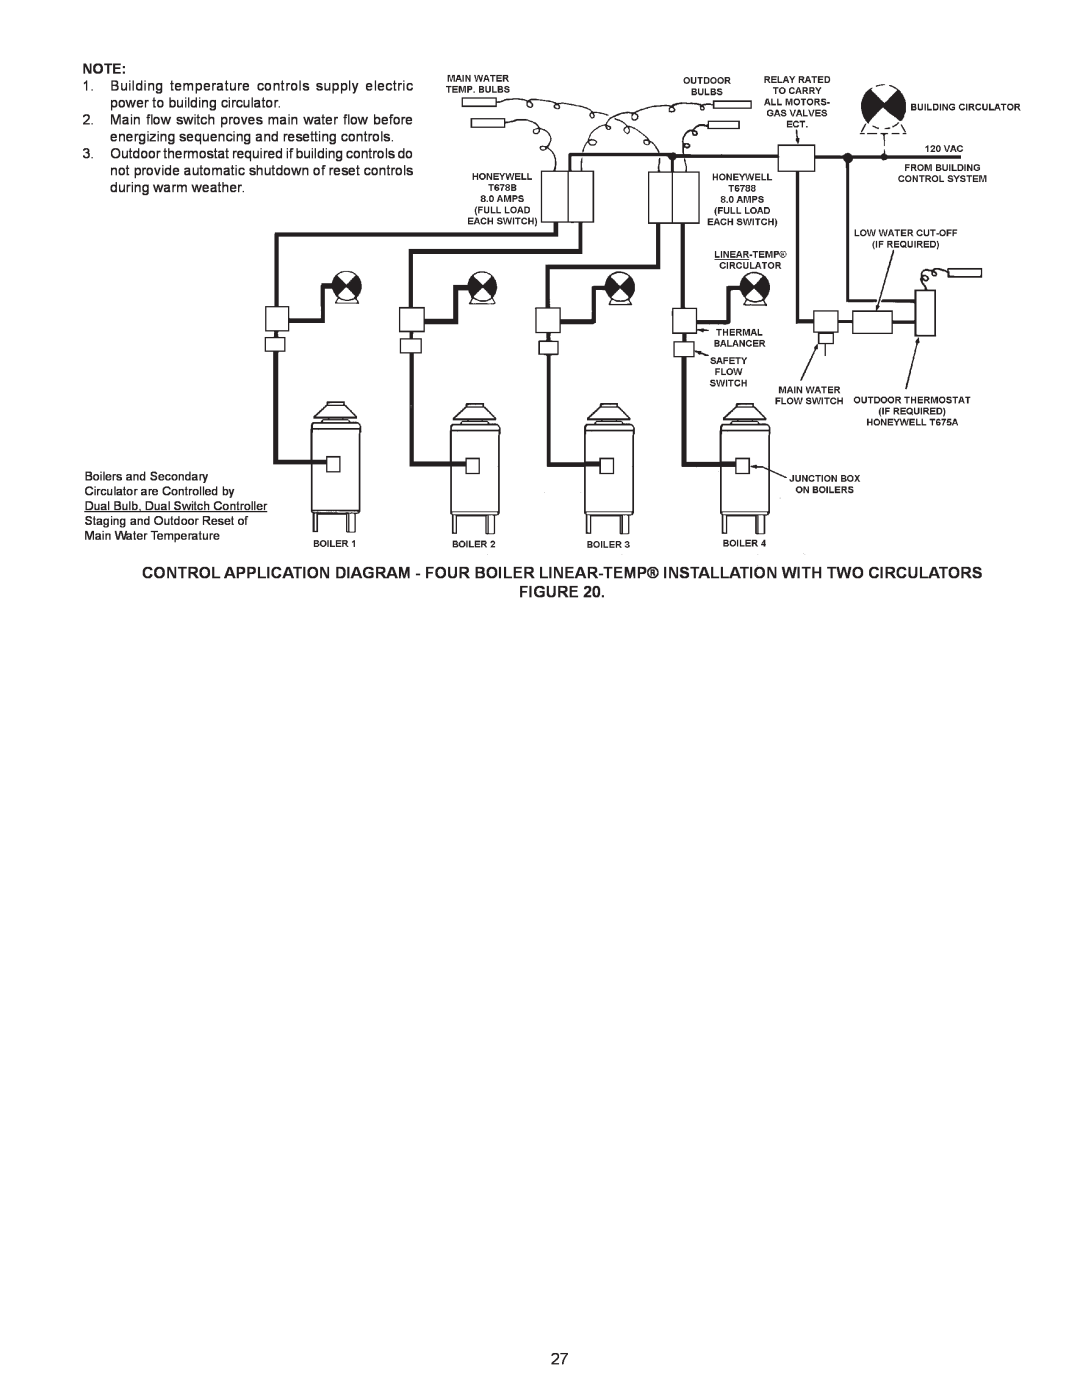 A.O. Smith HW 610 warranty Boilers and Secondary Circulator are Controlled by, Main Water Temperature 